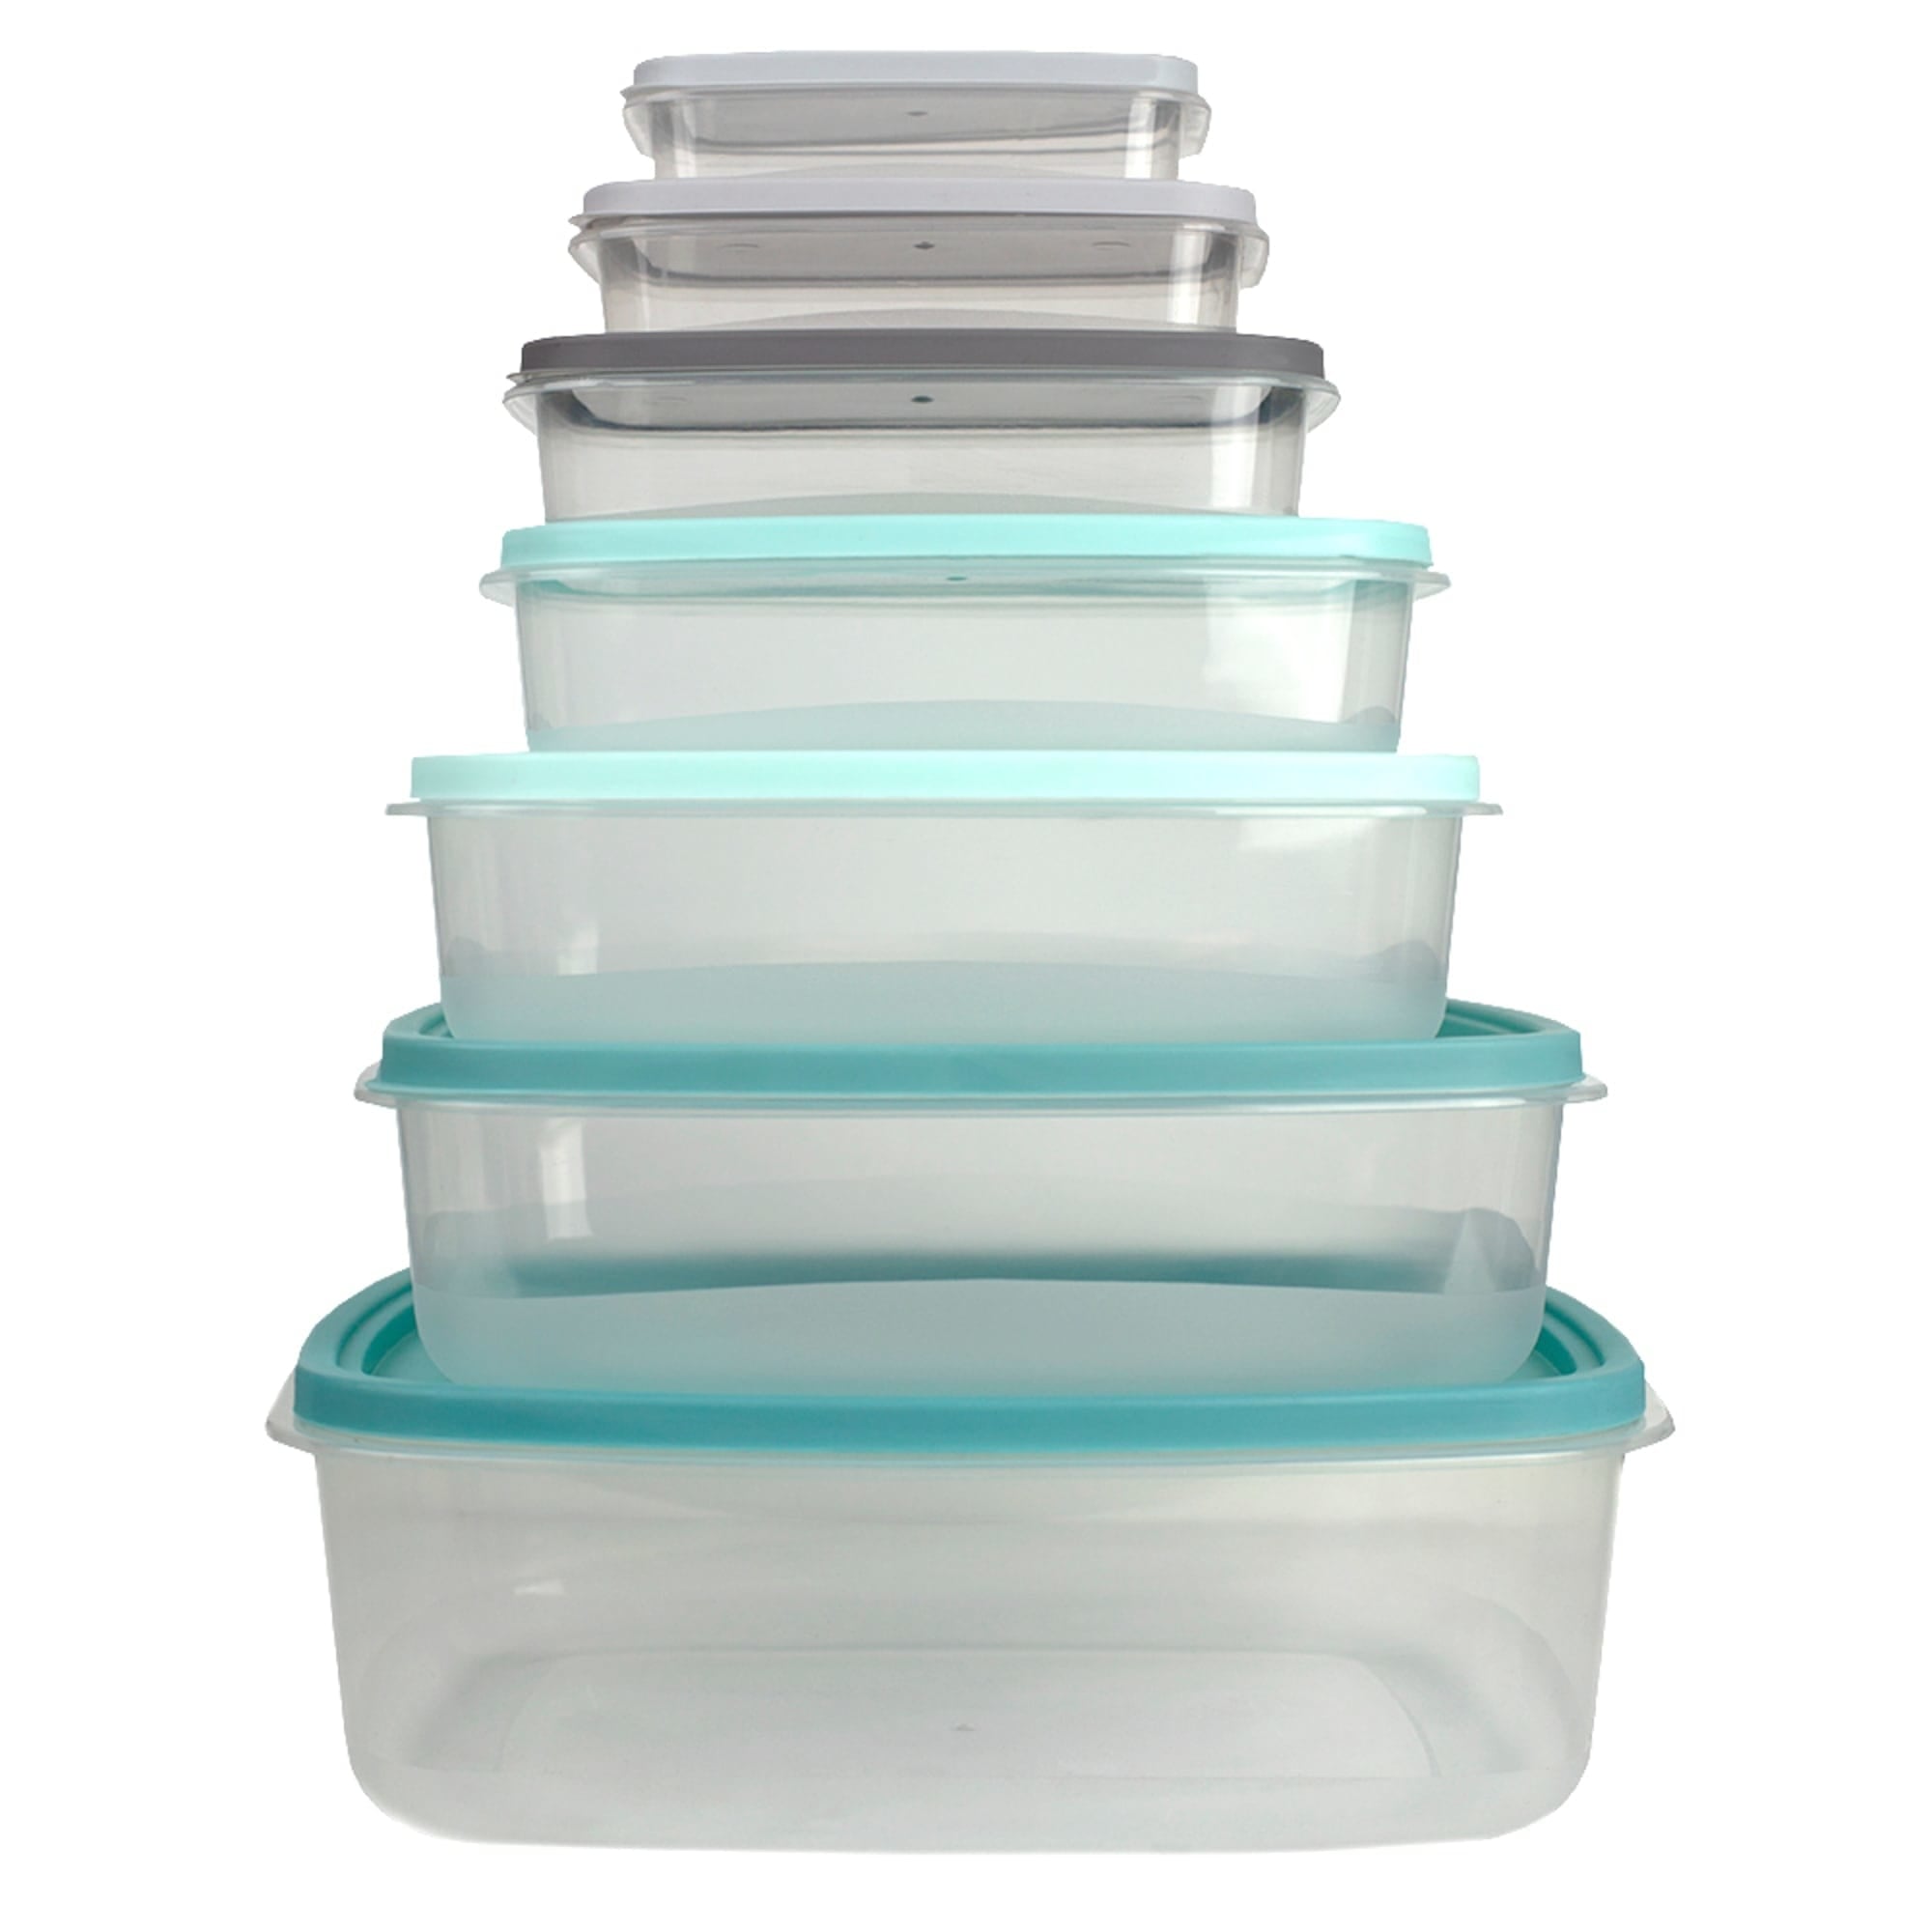 Home Basics 14 Piece Plastic Food Storage Container Set with Secure Fit Plastic Lids, Multi-Color $8.00 EACH, CASE PACK OF 6